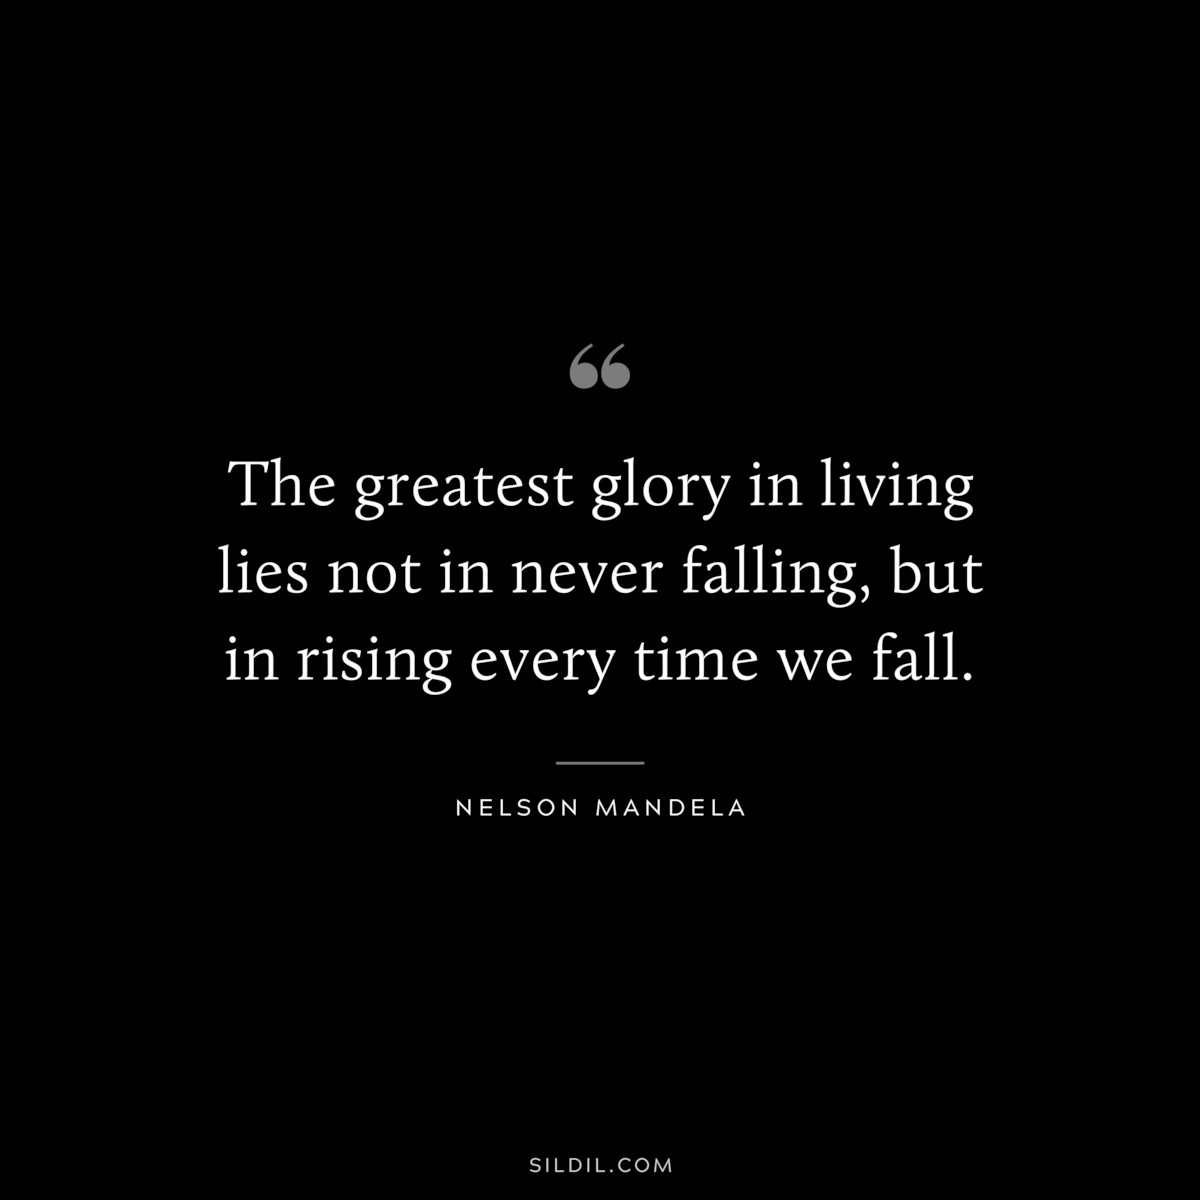 The greatest glory in living lies not in never falling, but in rising every time we fall. ― Nelson Mandela